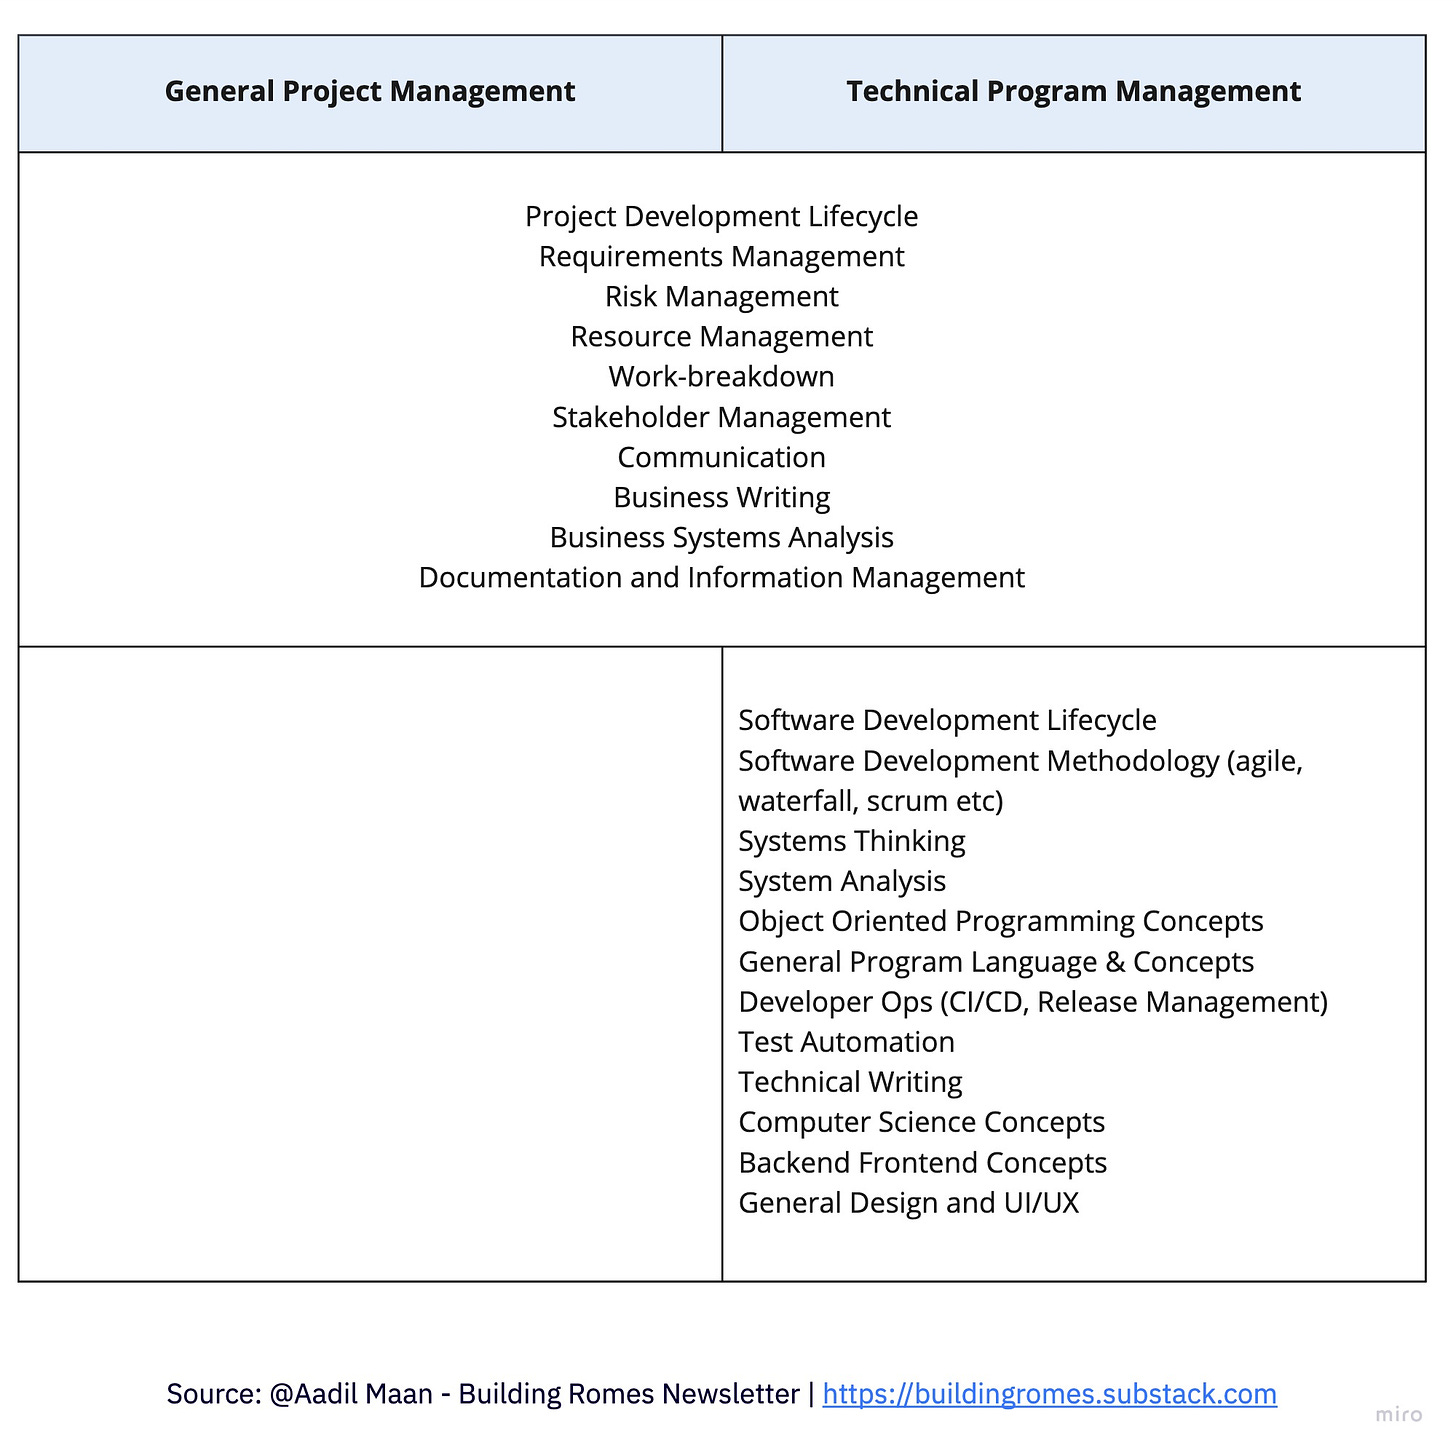 Table showcasing the similarities and differences between General Project Management and Technical Program Management.